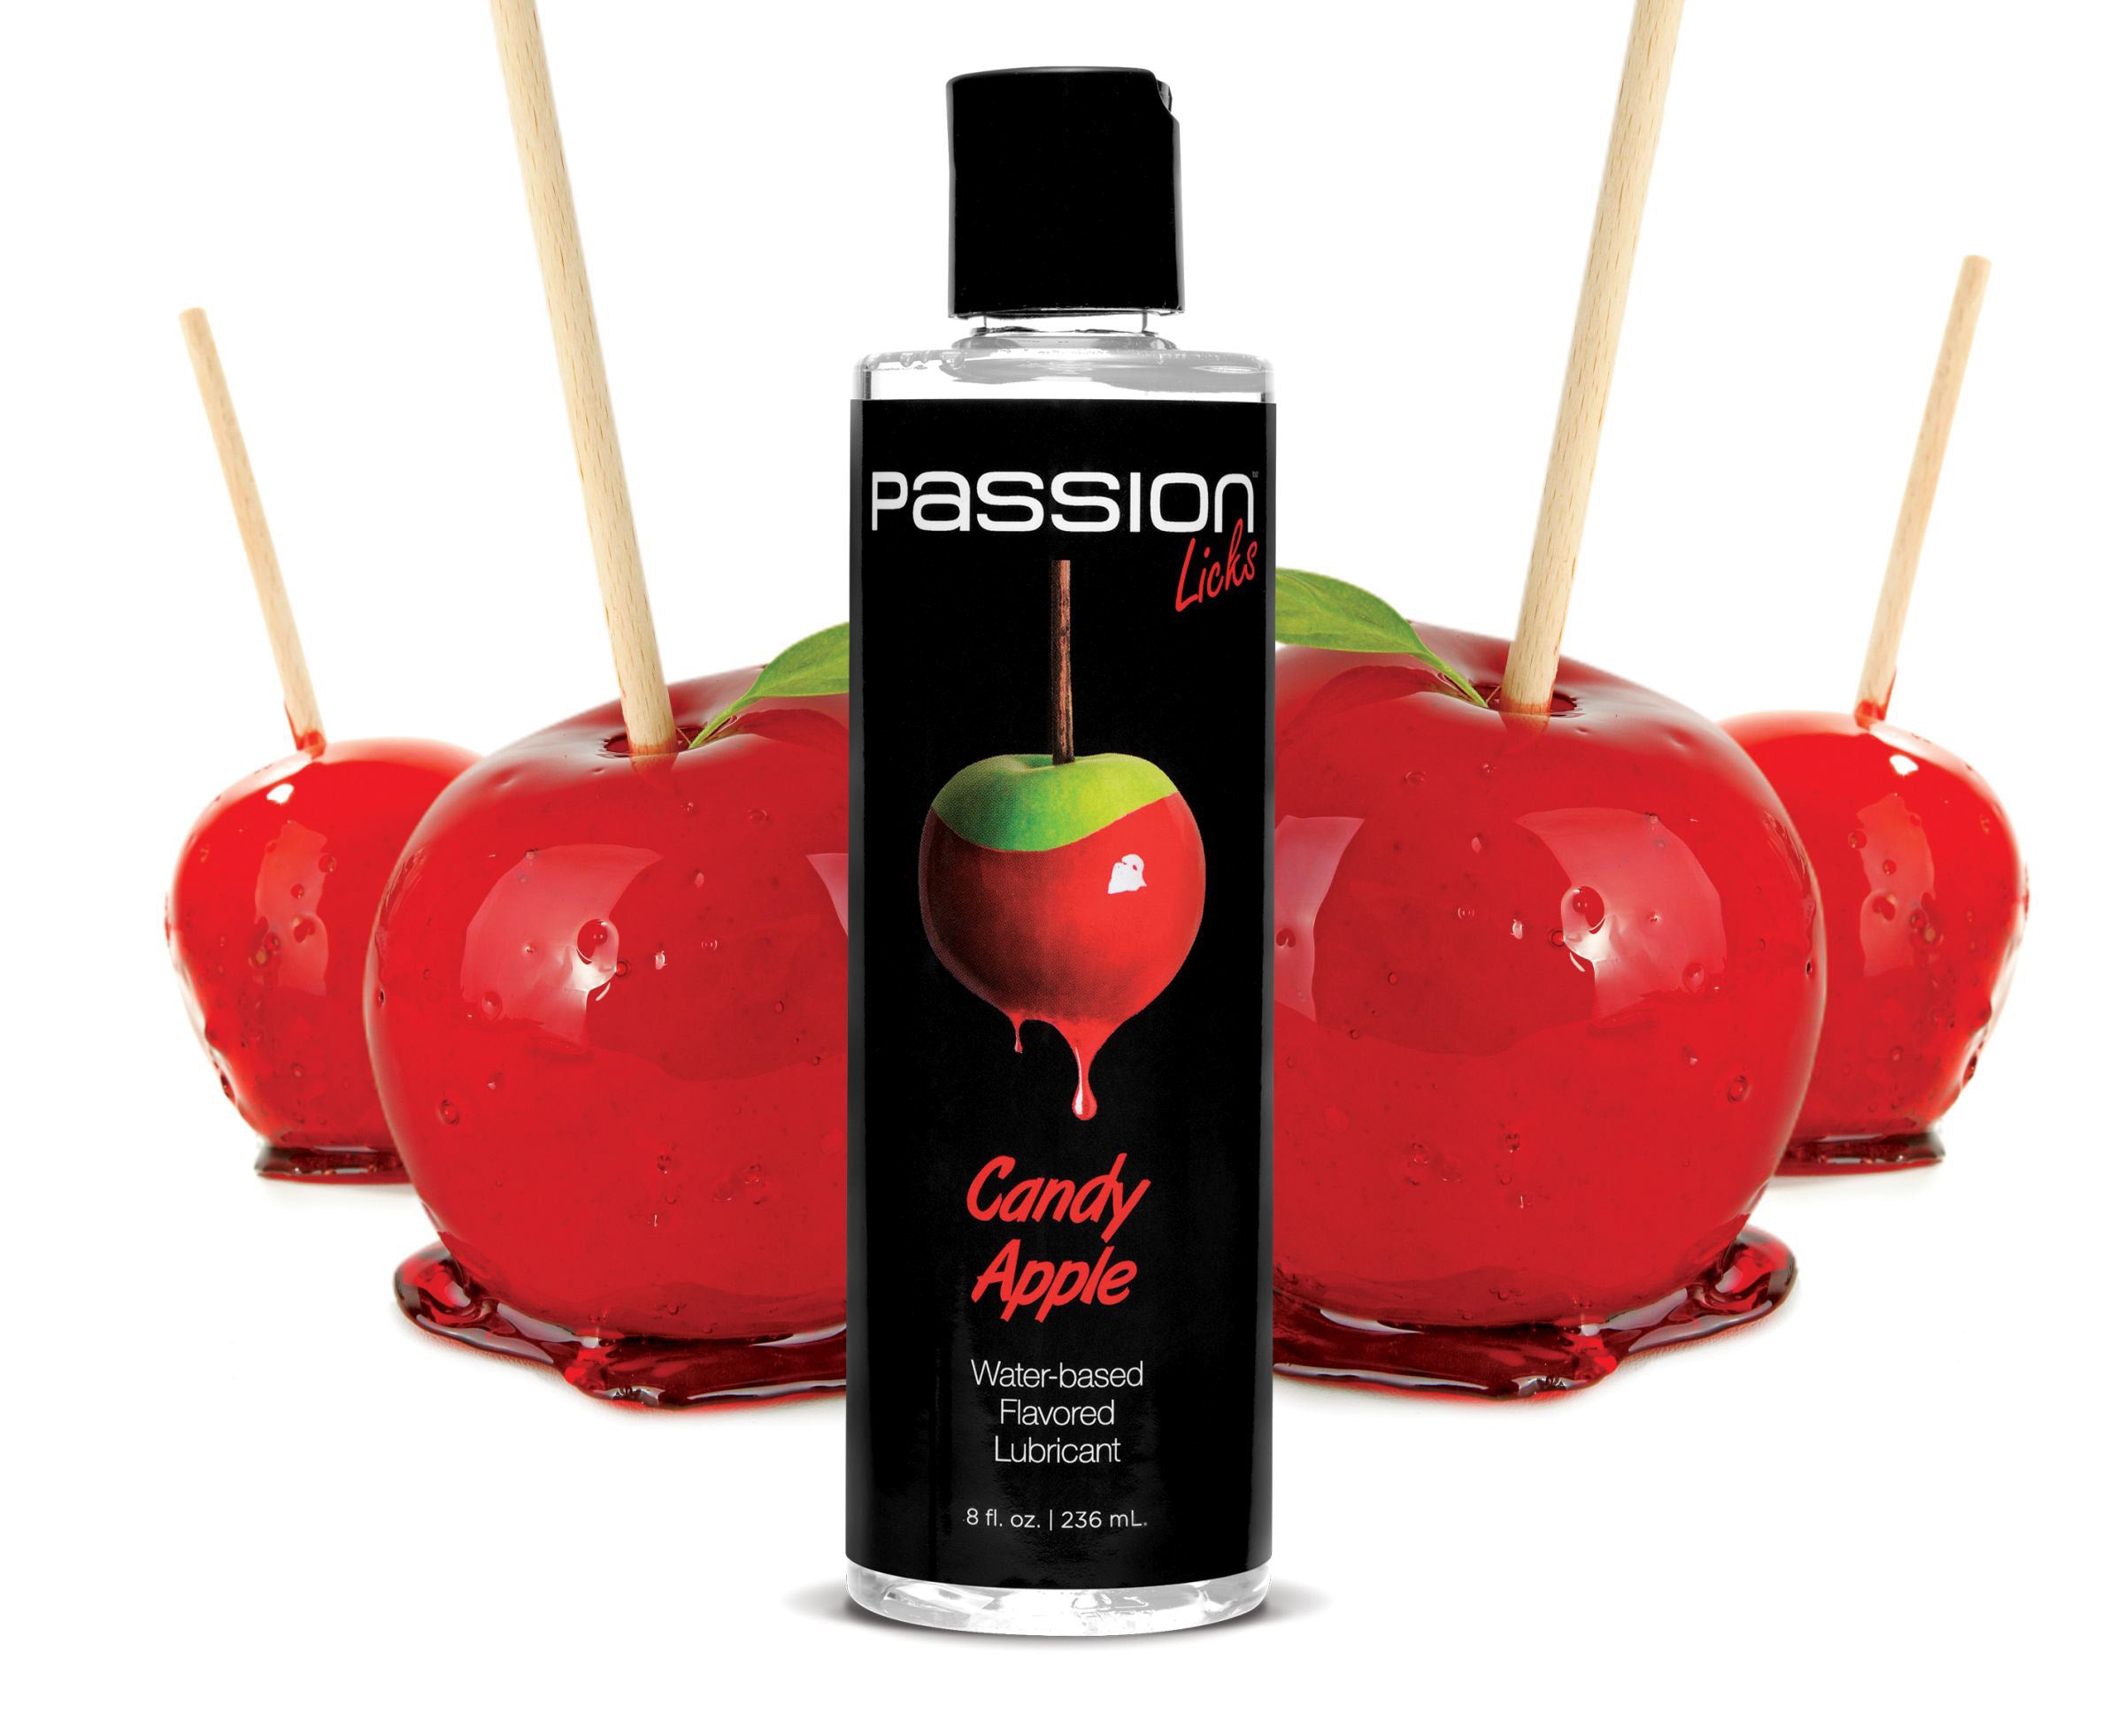 Passion Licks Candy Apple Water Based Flavored Lubricant - 8 Fl Oz / 236 ml